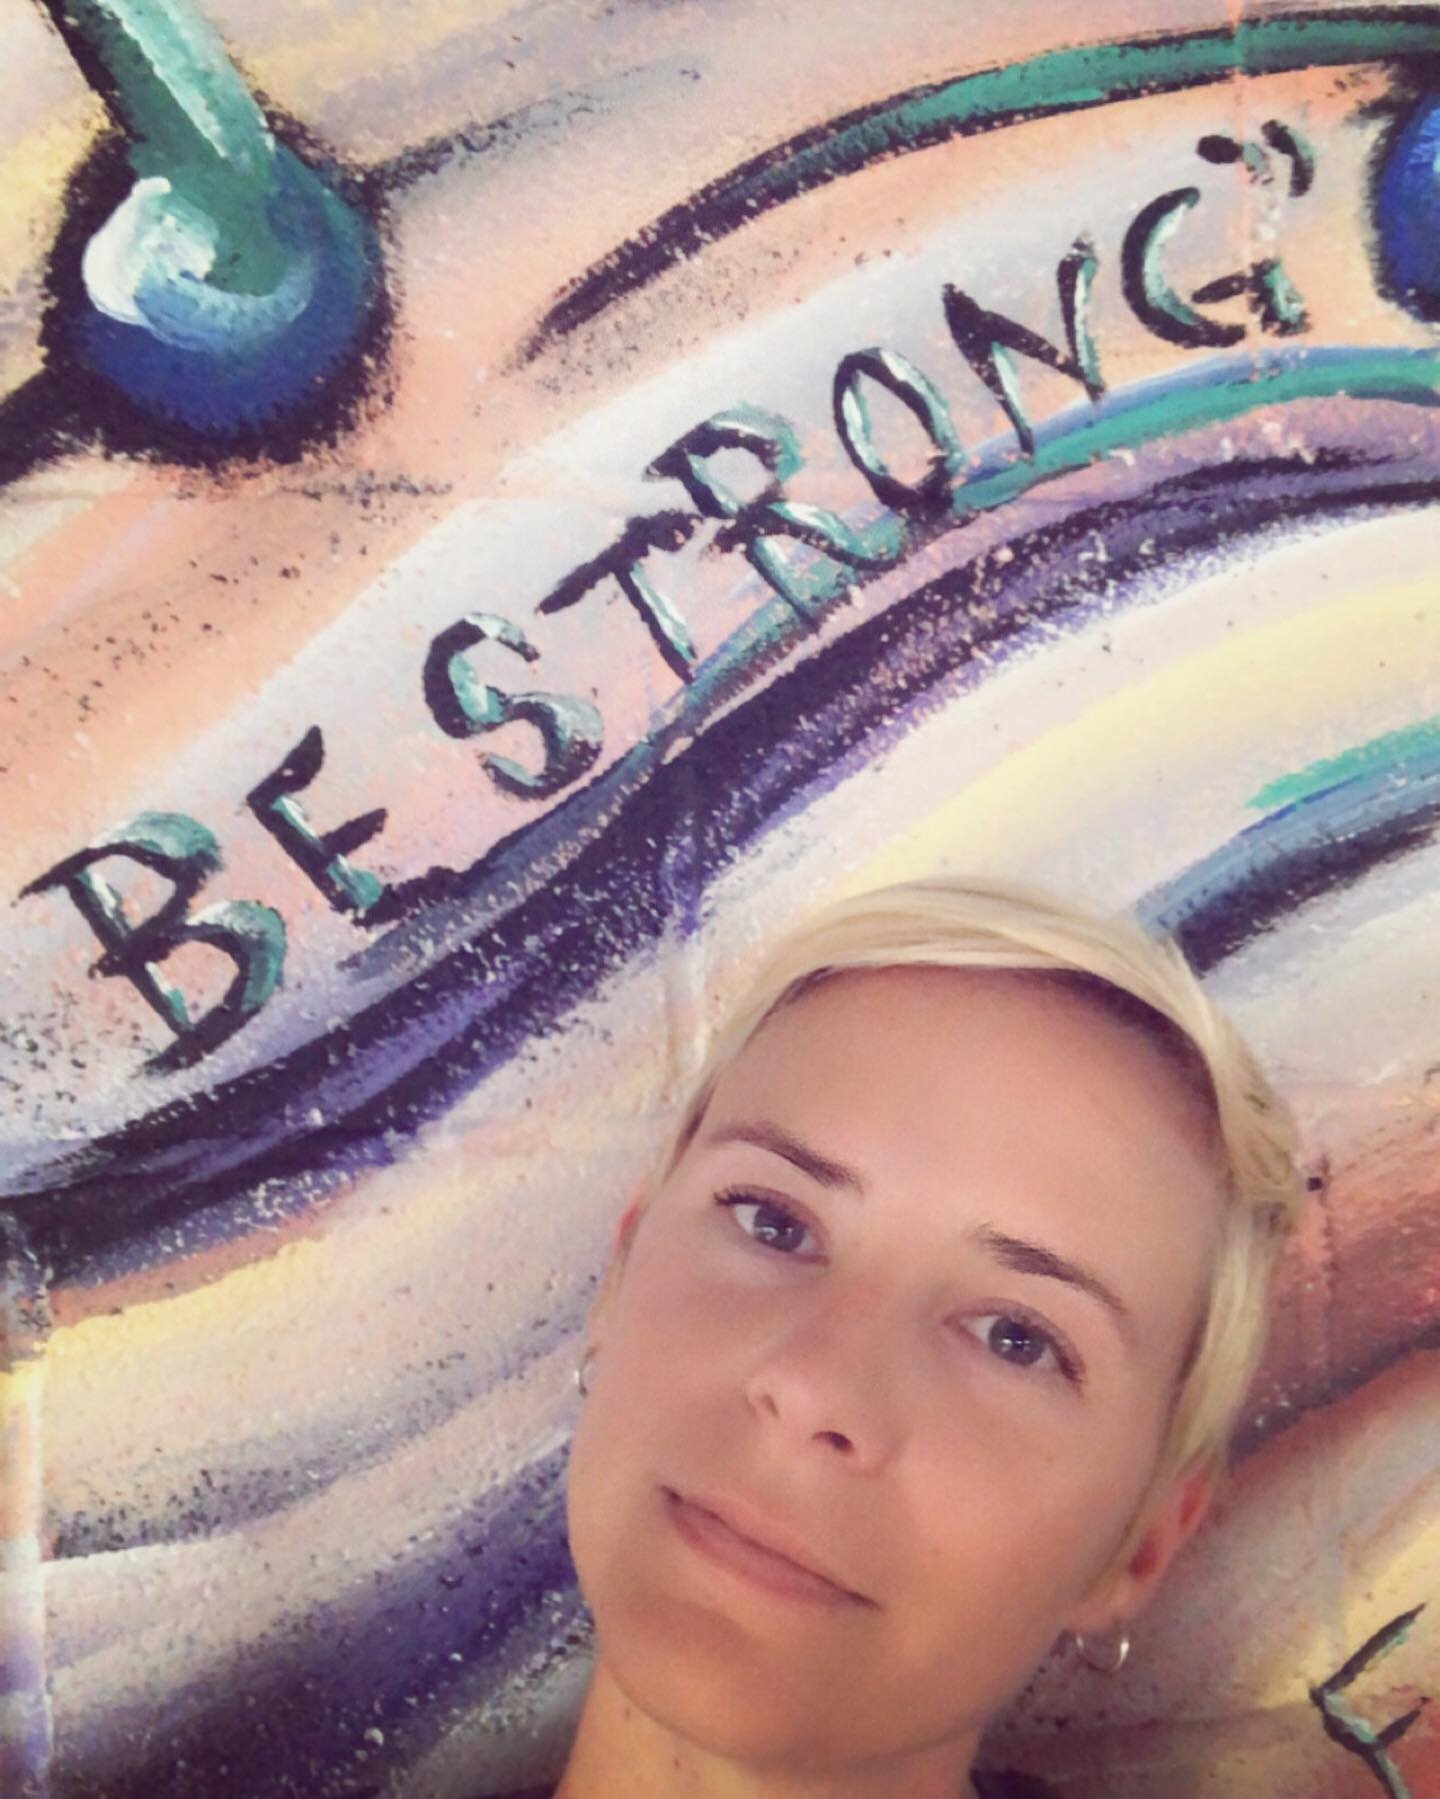 A shameless selfie on this beautiful Monday. Hoping you found an opportunity to be strong today, no matter what strength currently looks like for you. 💕
.
.
.
.
.
.
#linvilleyogateacher #boone #Boonenc #booneyoga #highcountyyoga #linville #linvillen